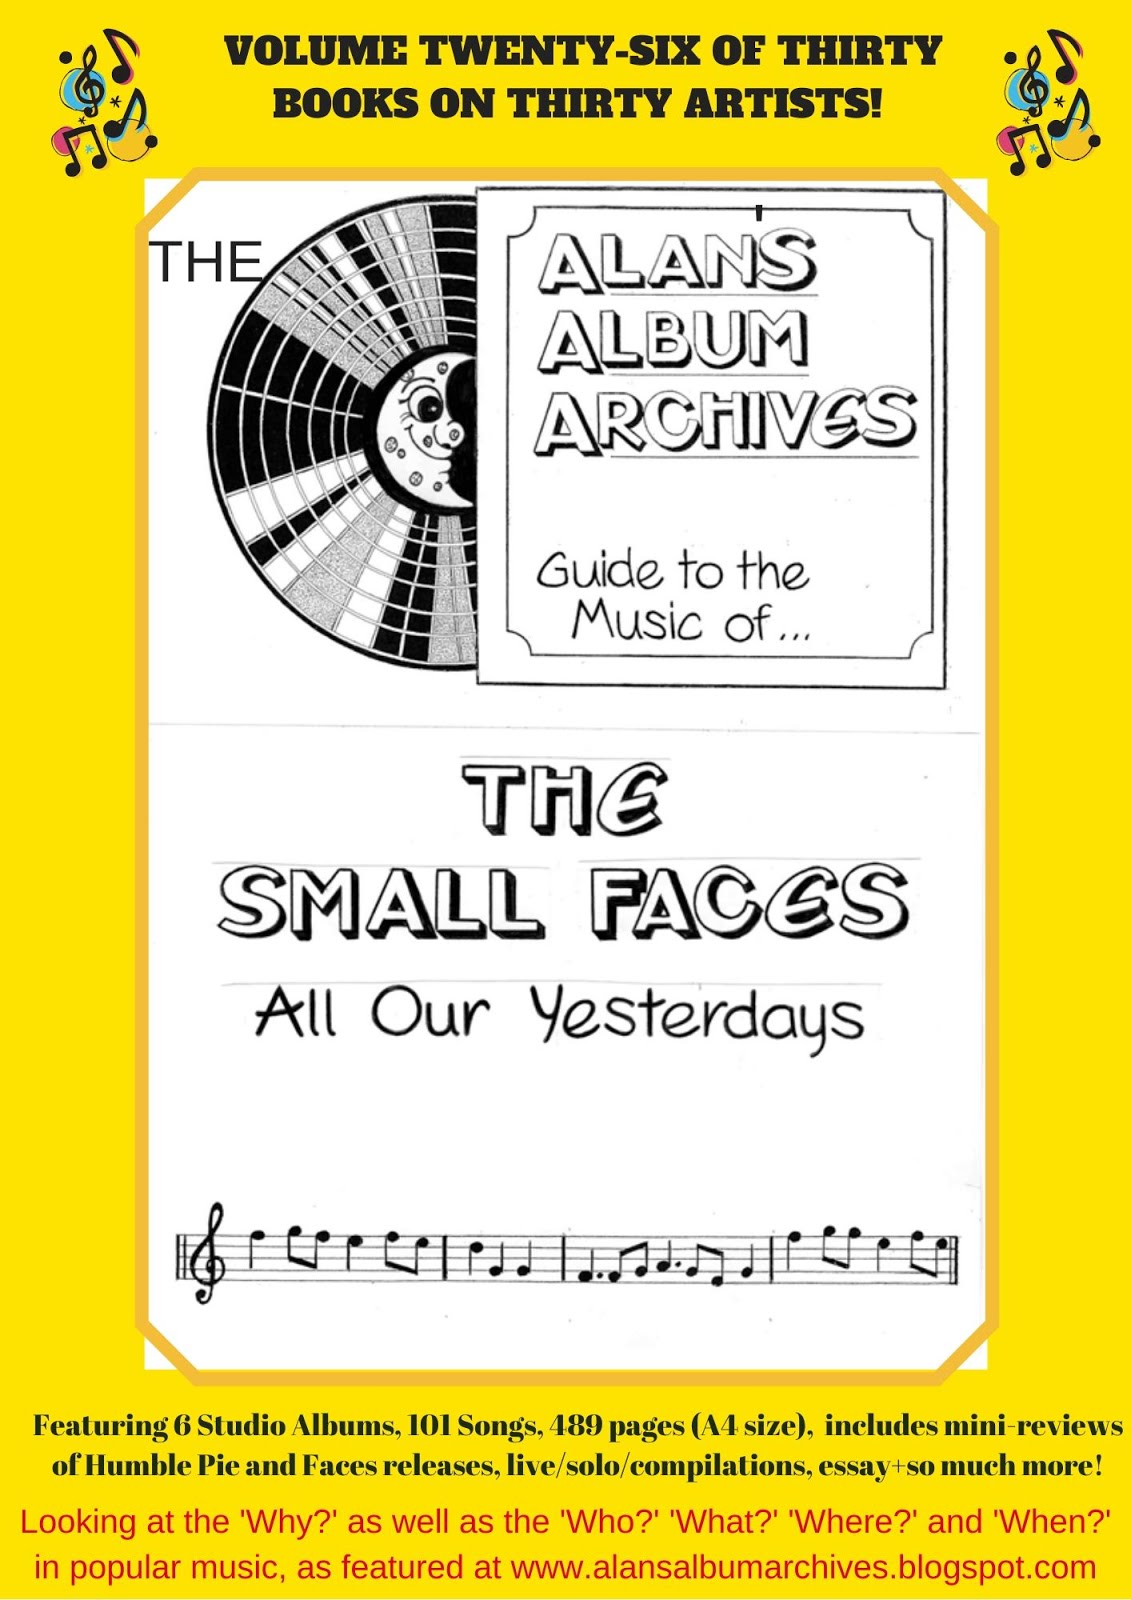 'All Our Yesterdays - The Alan's Album Archives Guide To The Music Of The Small Faces'